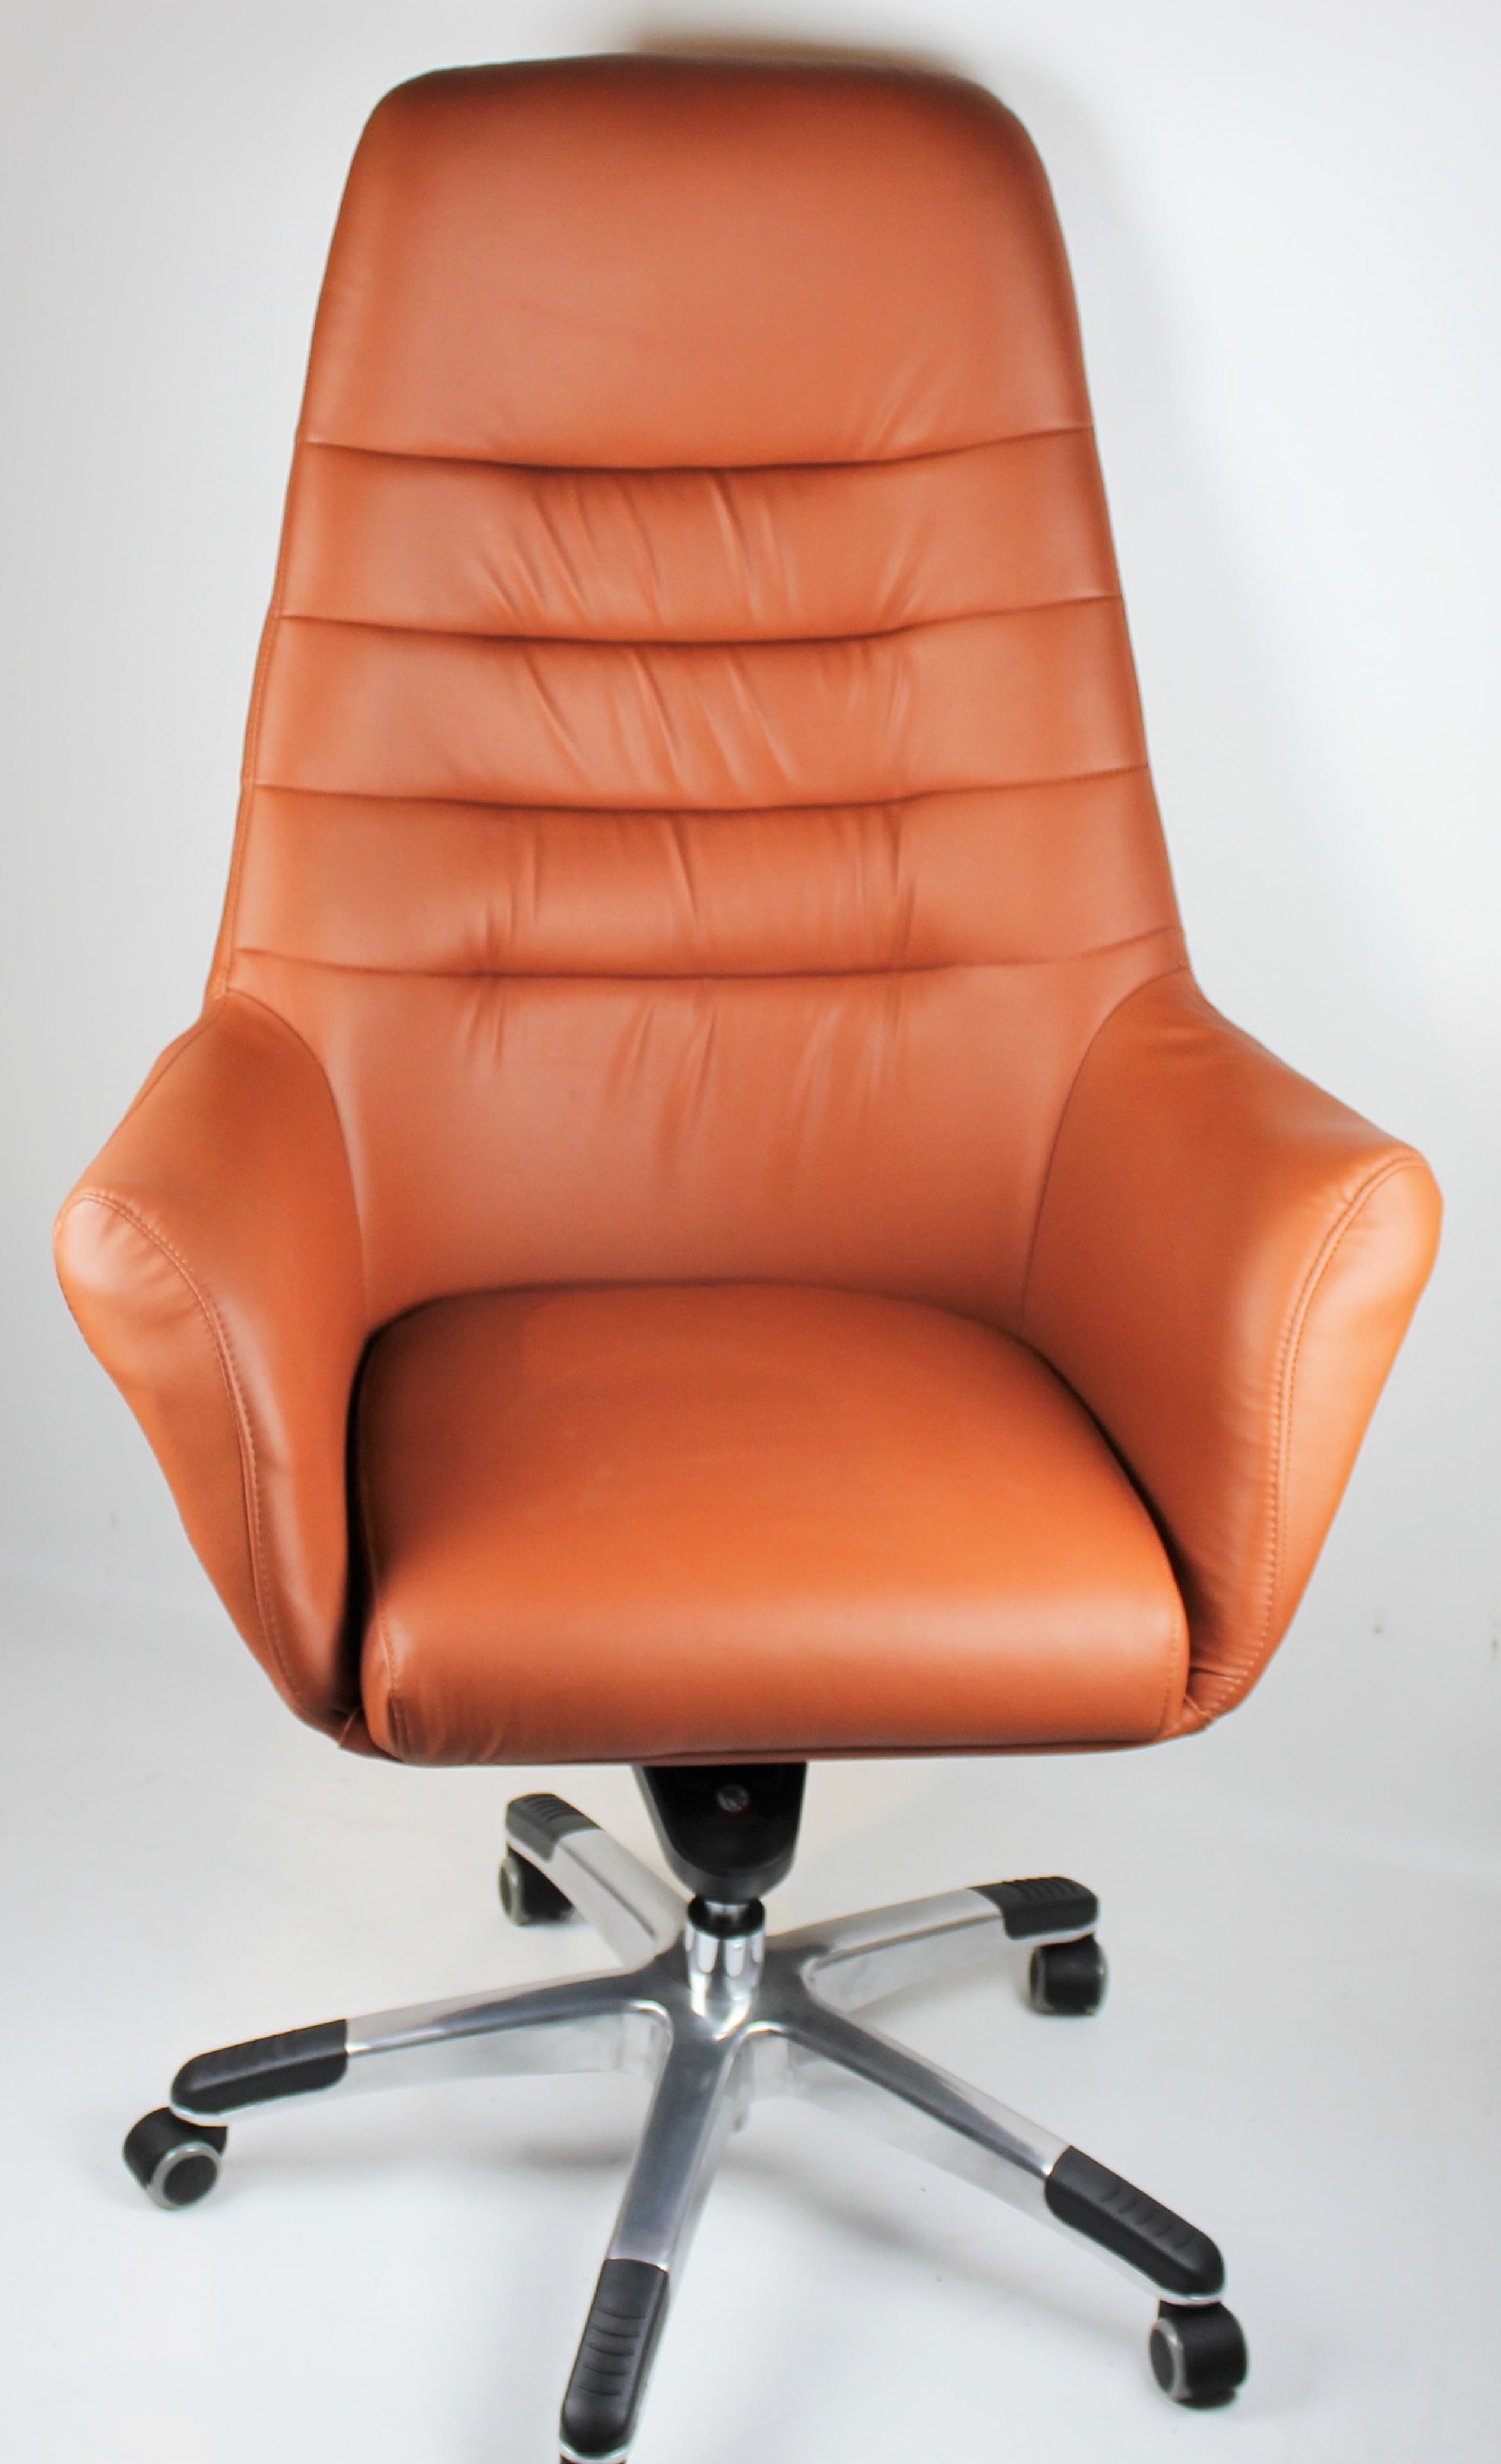 Office Chair In Tan With Swivel GRA-CHA-506A Huddersfield